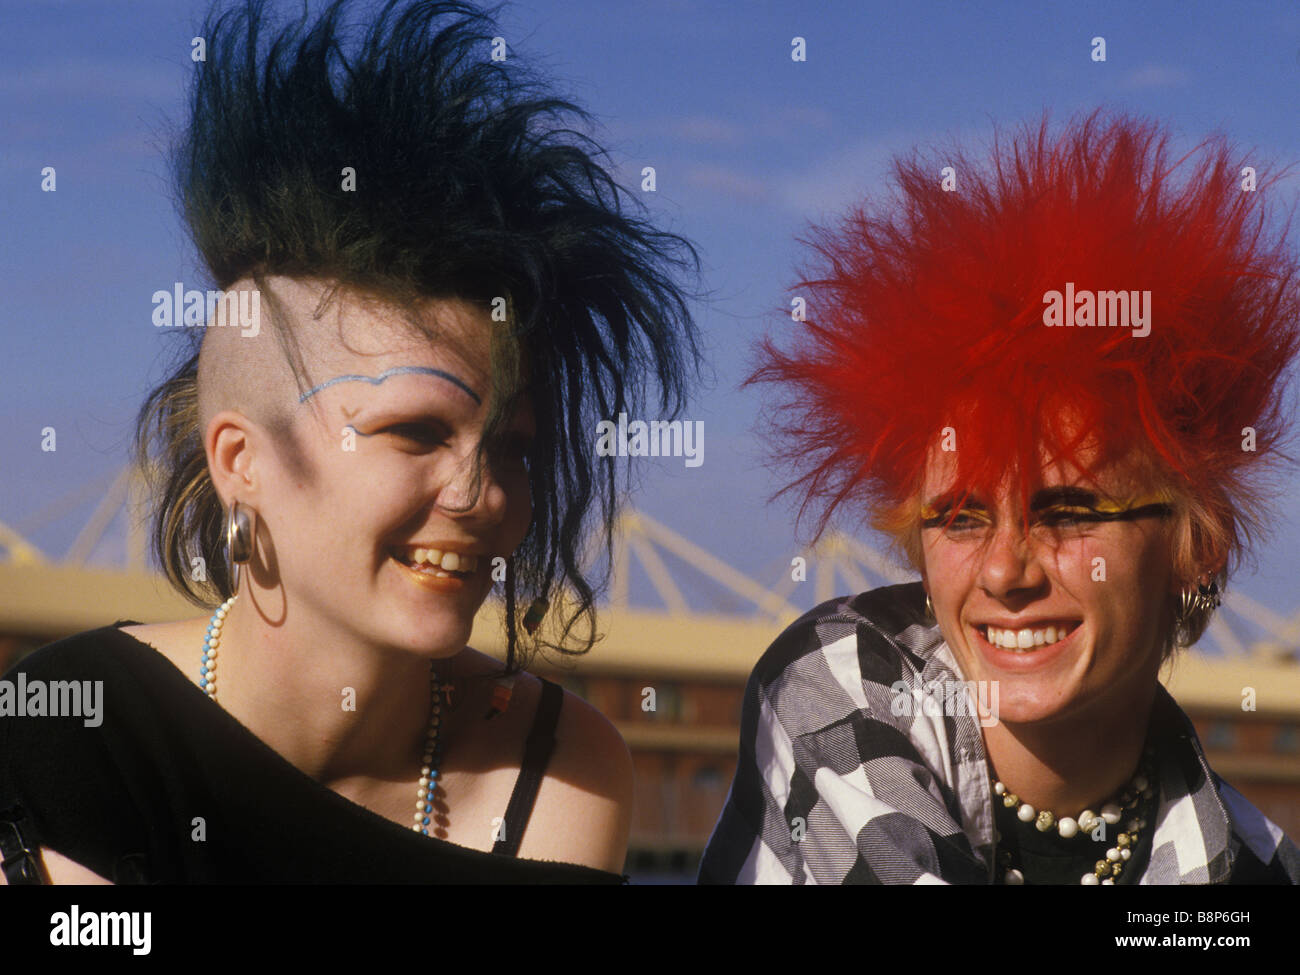 80s Hairstyle Stock Photos & 80s Hairstyle Stock Images - Alamy